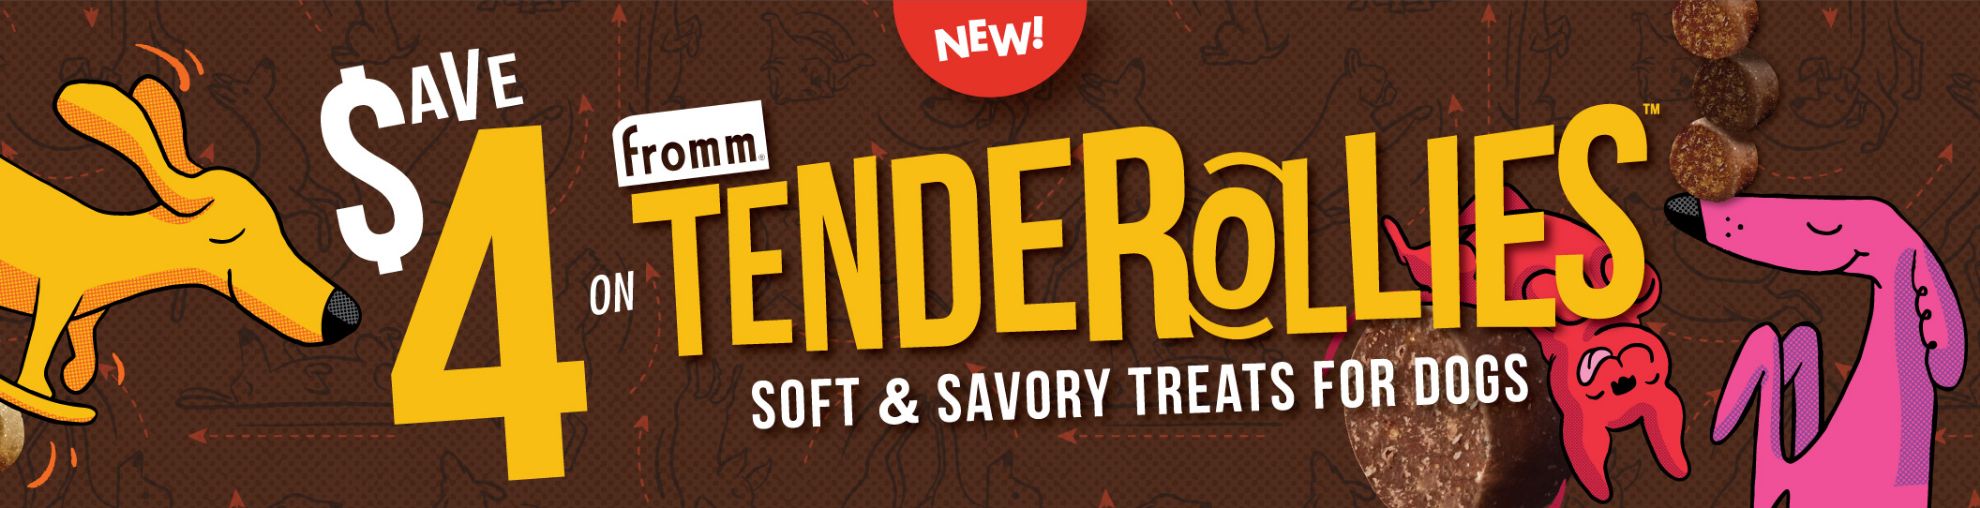 Tenderollies Soft & Savory Treats for Dogs